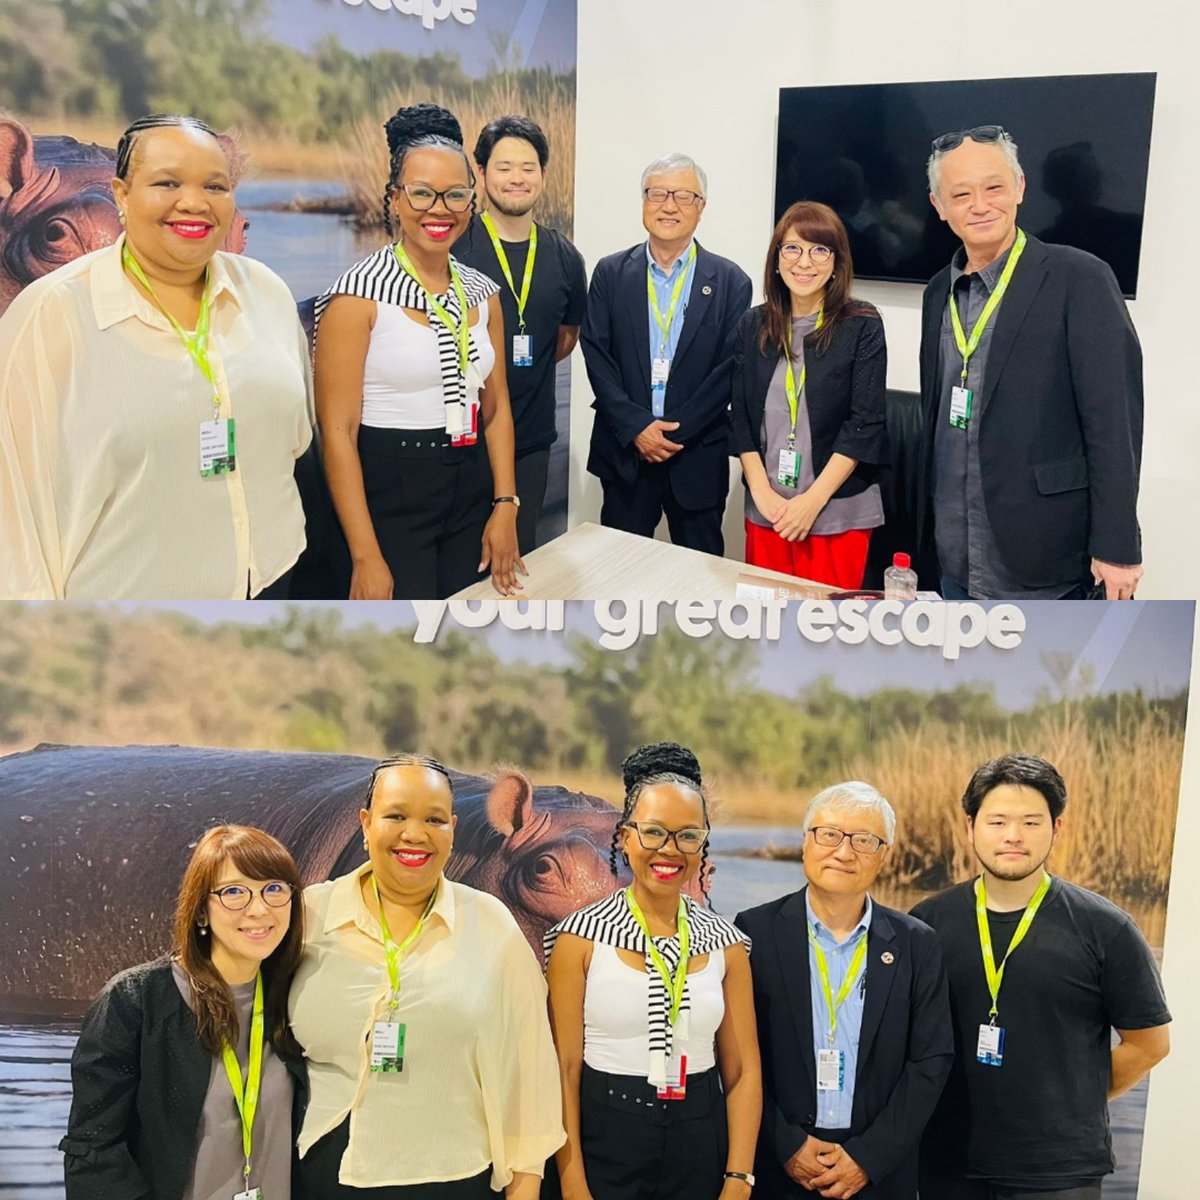 Japanese Media and SAT Japan officials learning about what KwaZulu-Natal has to offer through the mini presentation of our tourist map at the #ATI2024 🗺️🇿🇦

#AfricaTravelIndaba2024 #ATIinKZN #KZNHasItAll #BelieveIt #indabatravel2024